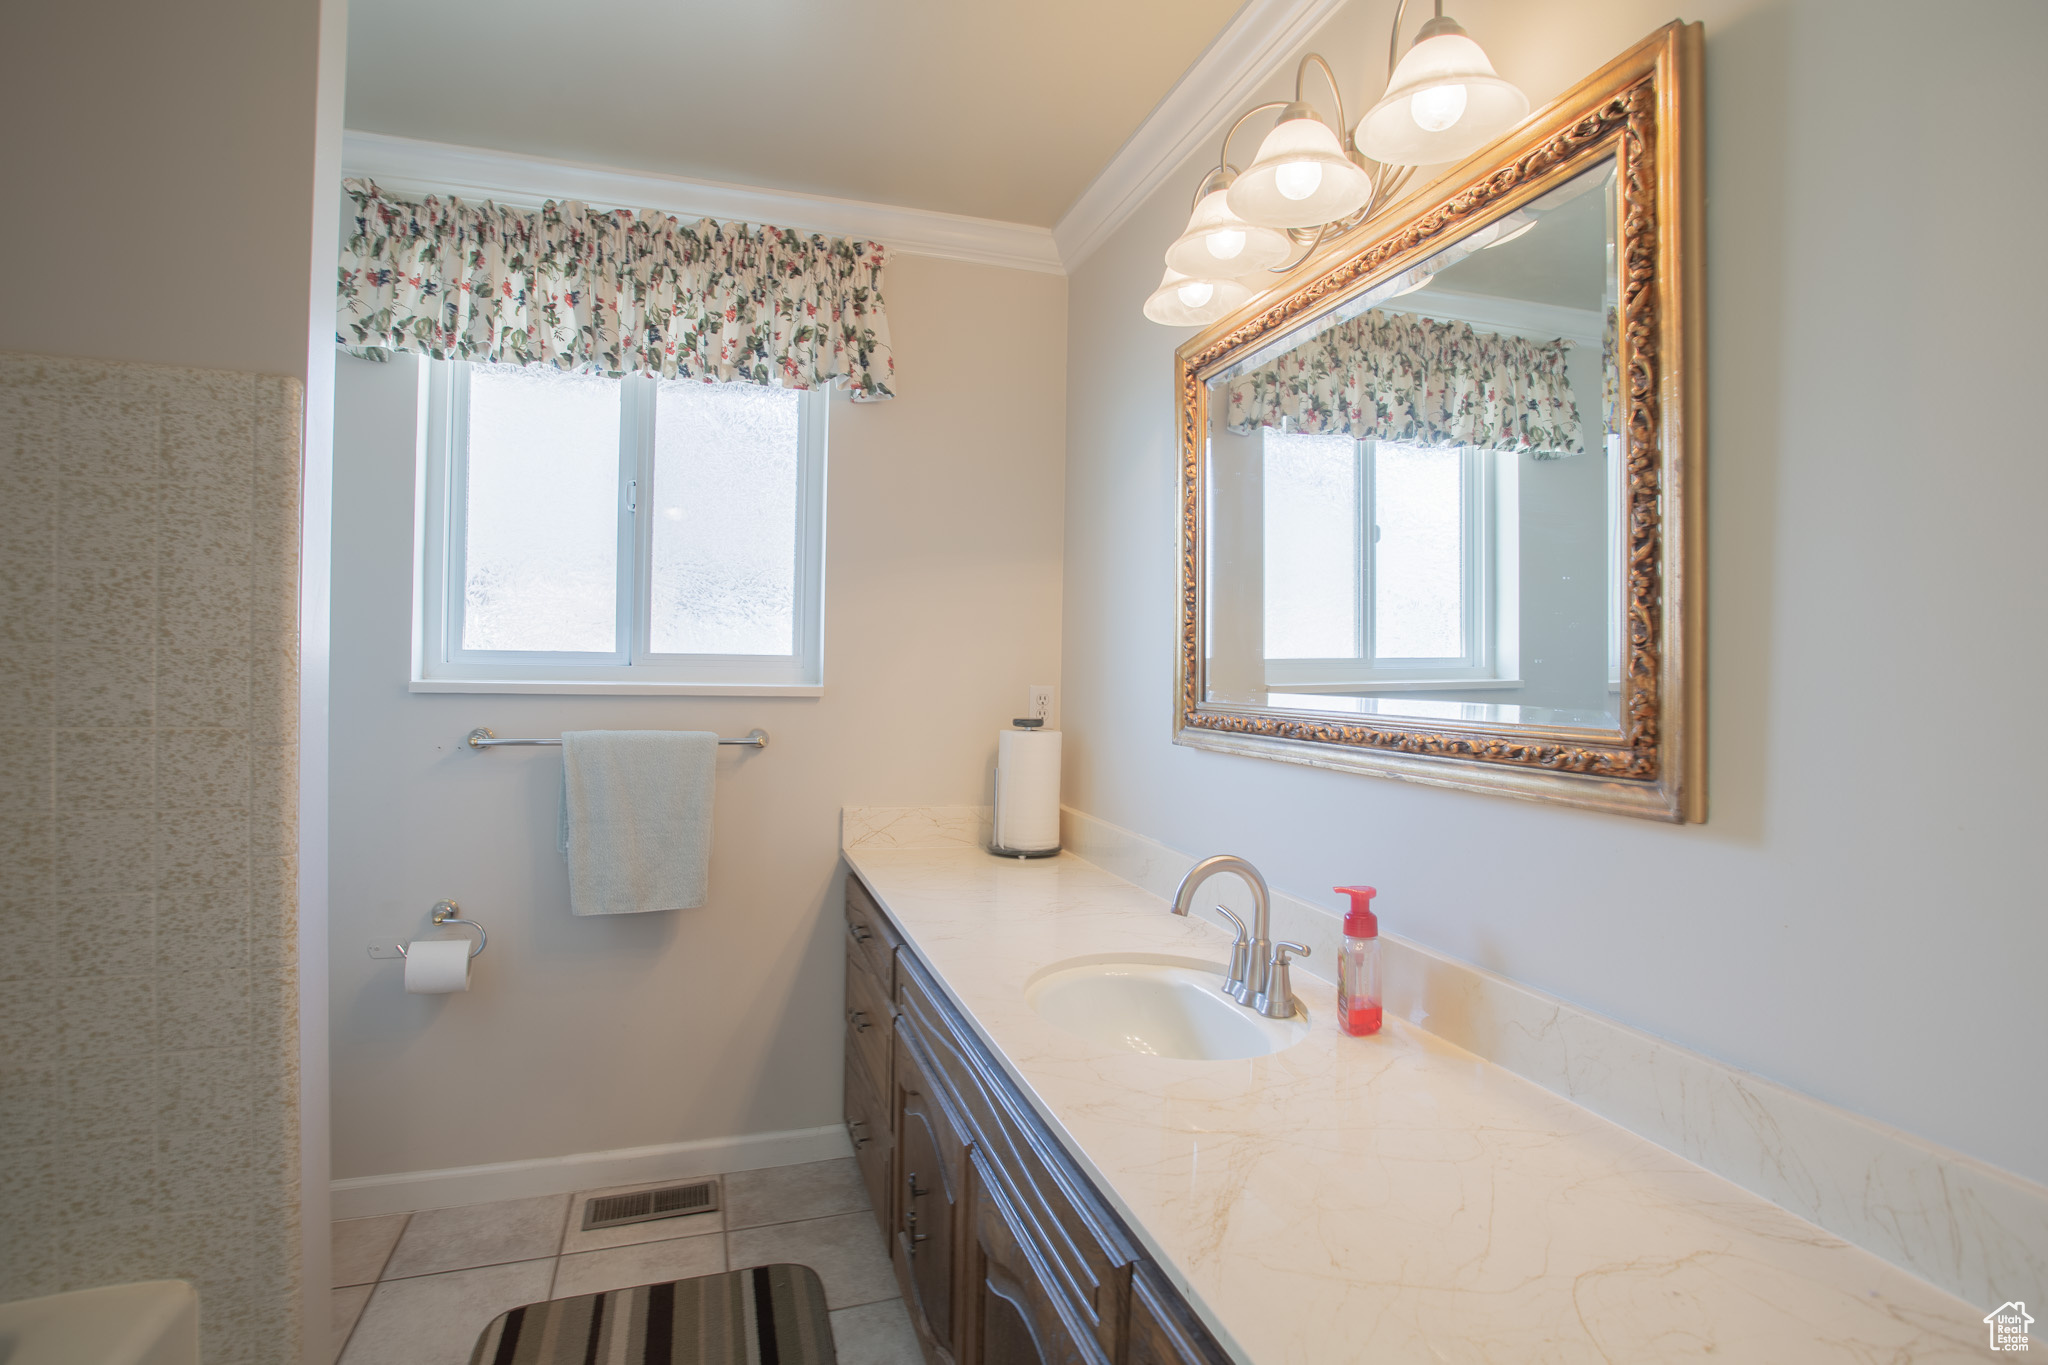 Bathroom with a healthy amount of sunlight, oversized vanity, ornamental molding, and tile flooring